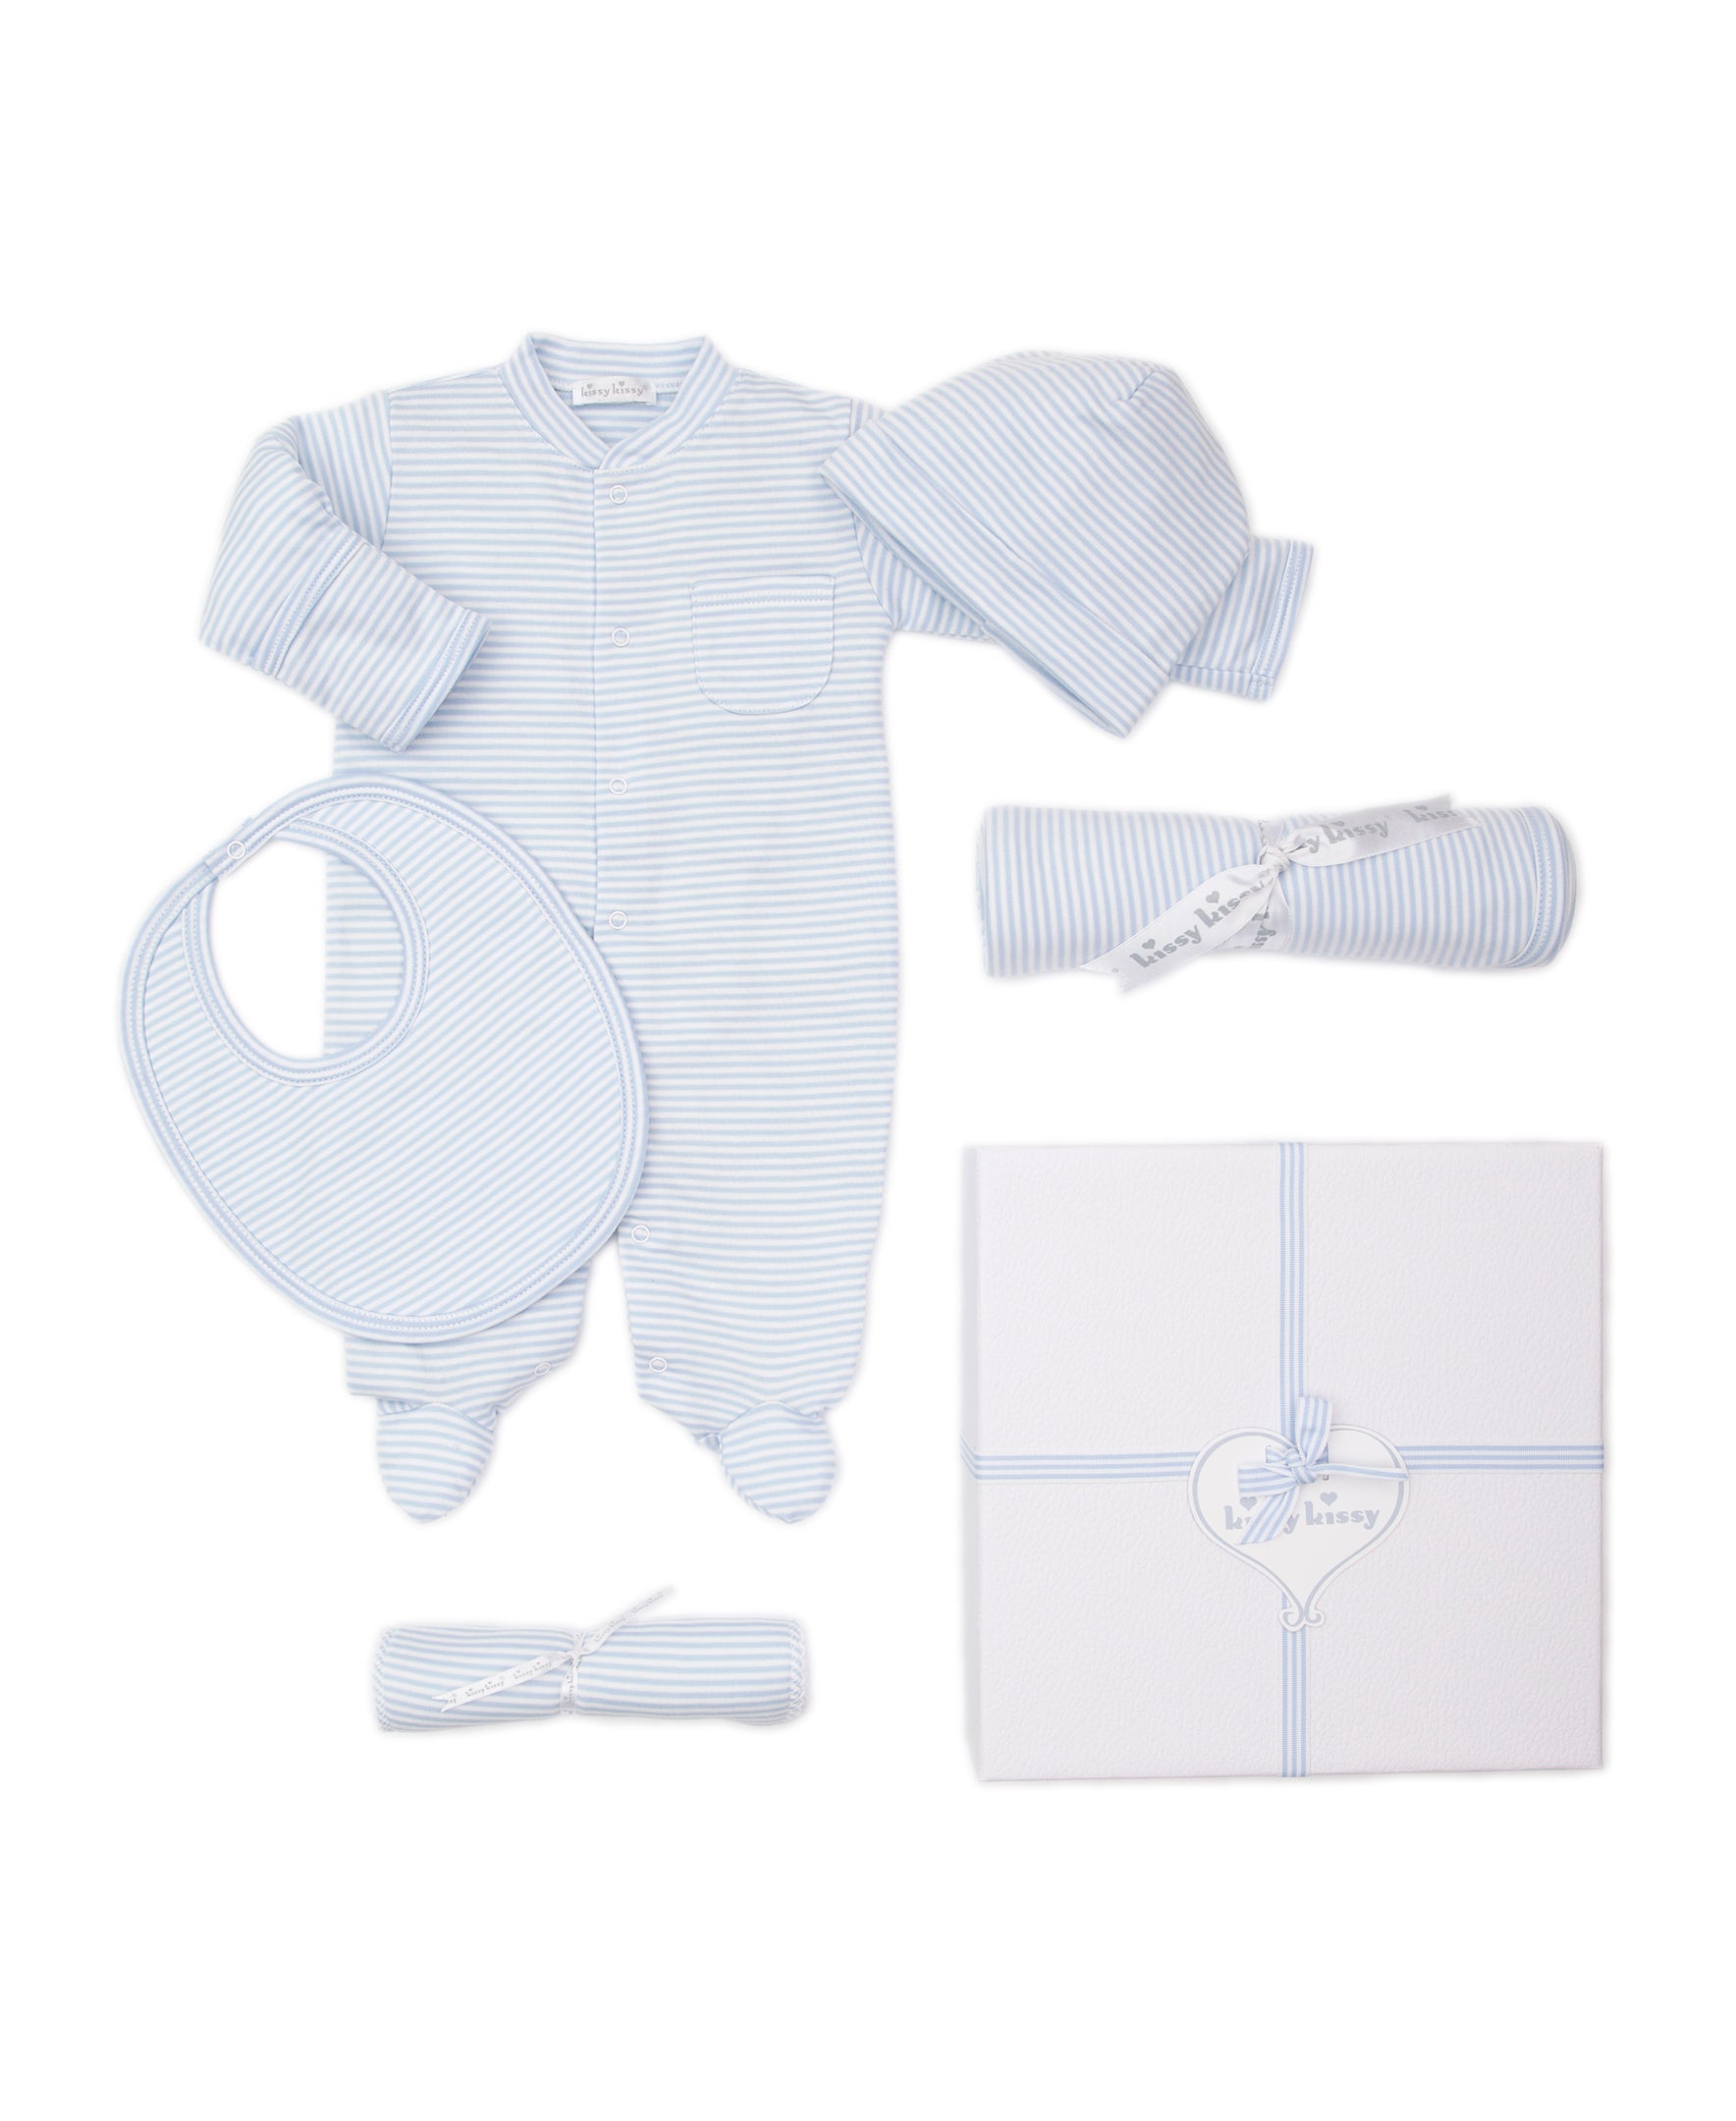 Little Hub New Born Unisex Baby 6 Pcs Gift Set - 0-3 Months - Unisex - Born  Baby Products Online in India: Kids Shopping Online in India